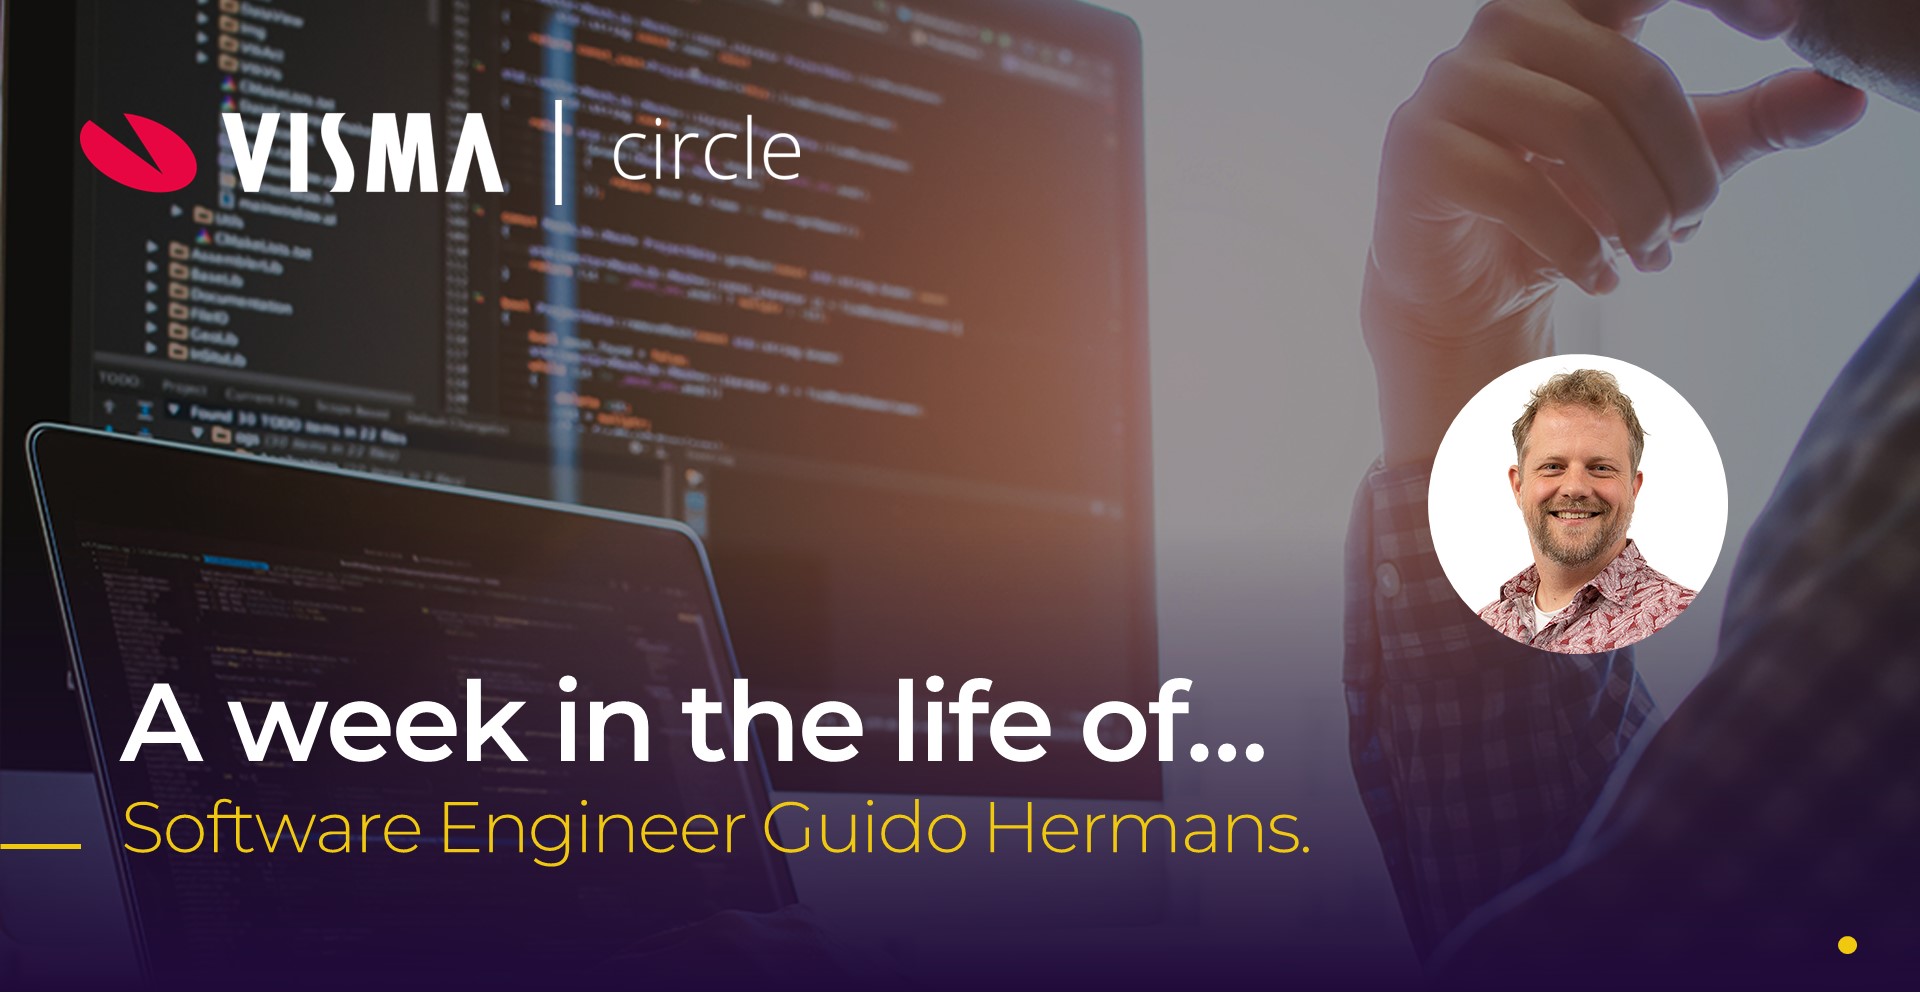 A week in the life of Software Engineer Guido